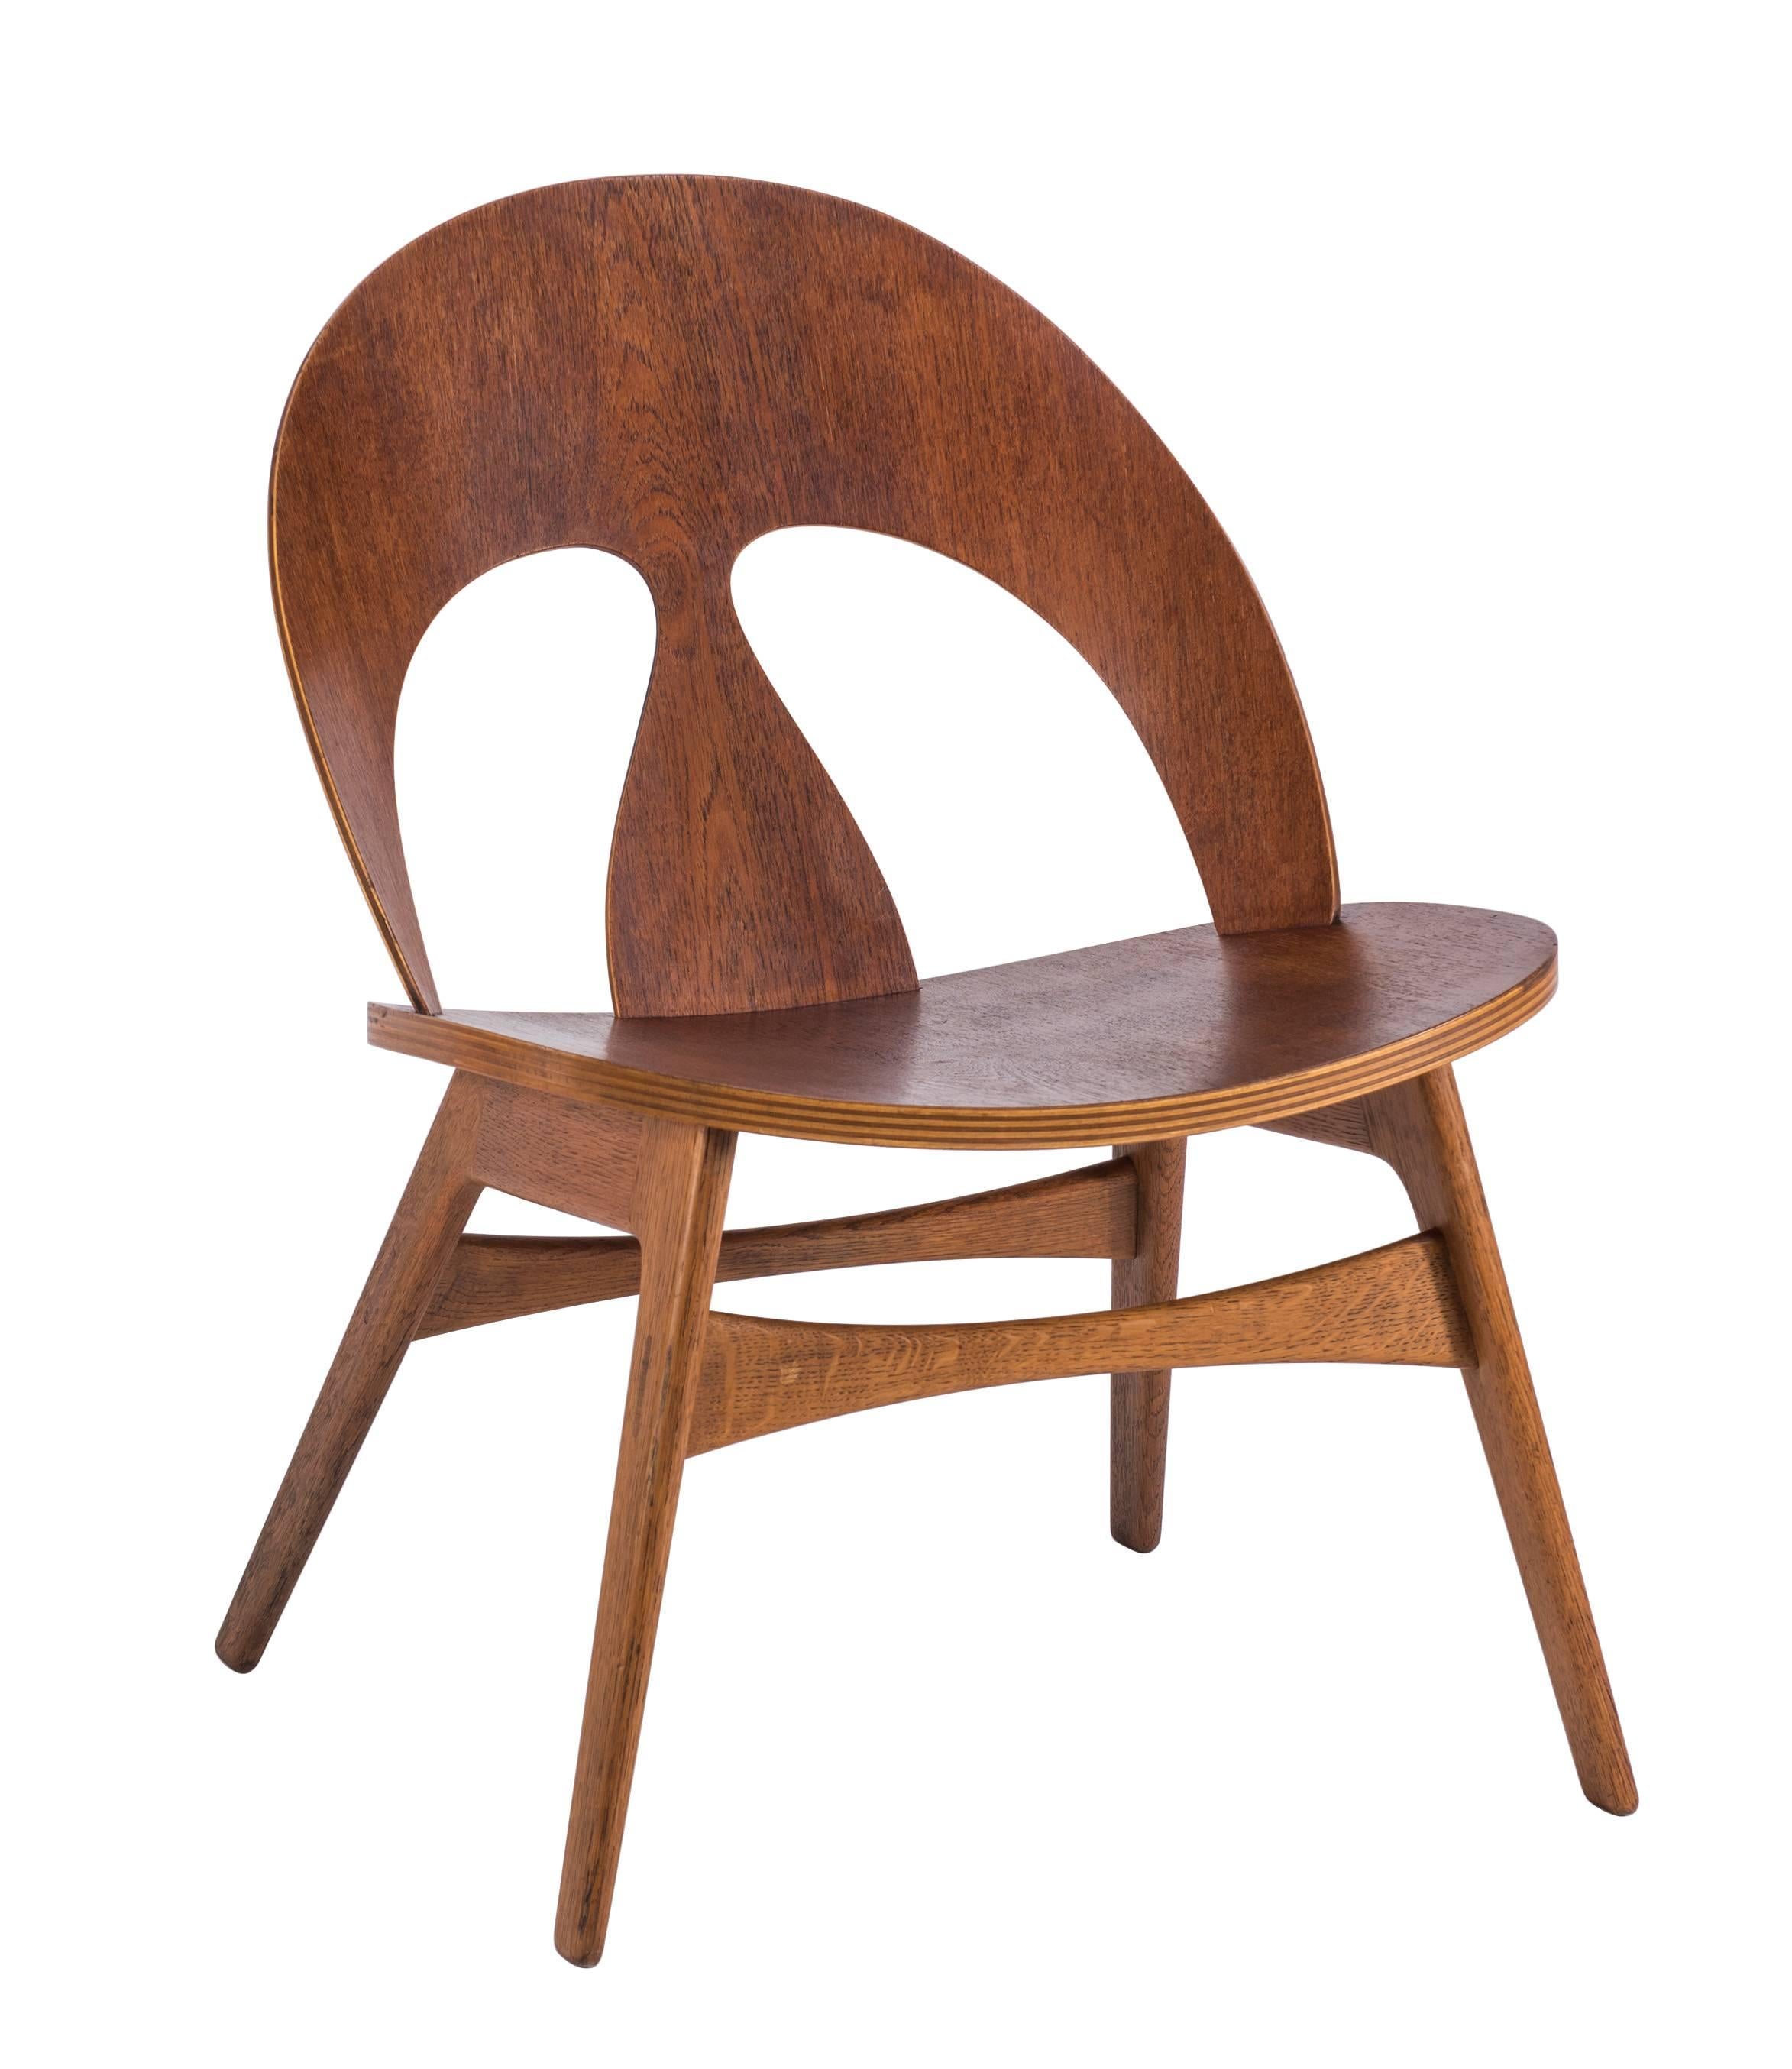 Danish Pair of Early Børge Mogensen Plywood Lounge Chairs for Erhard Rasmussen